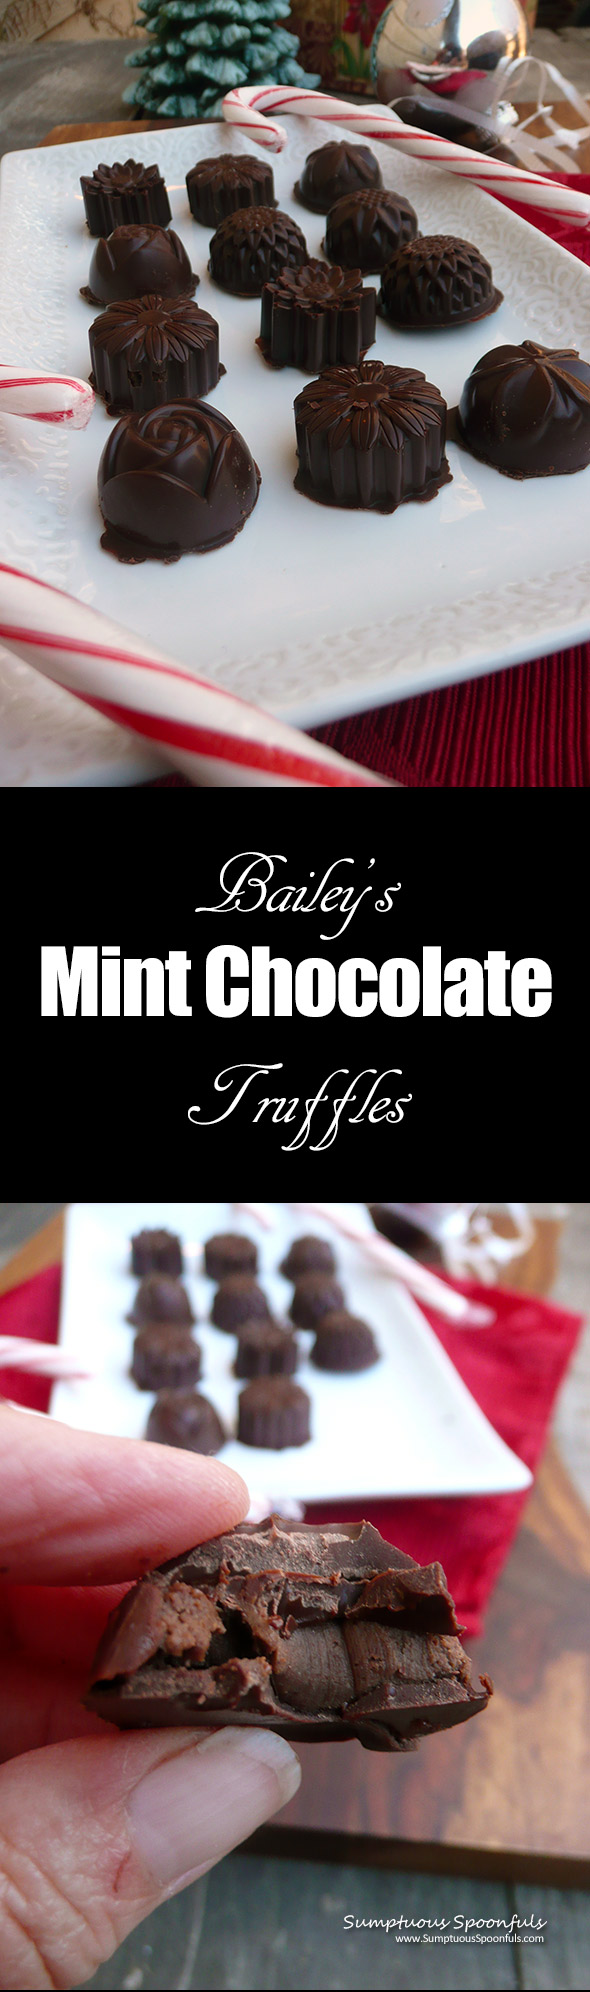 Bailey’s Mint Chocolate Truffles | Sumptuous Spoonfuls